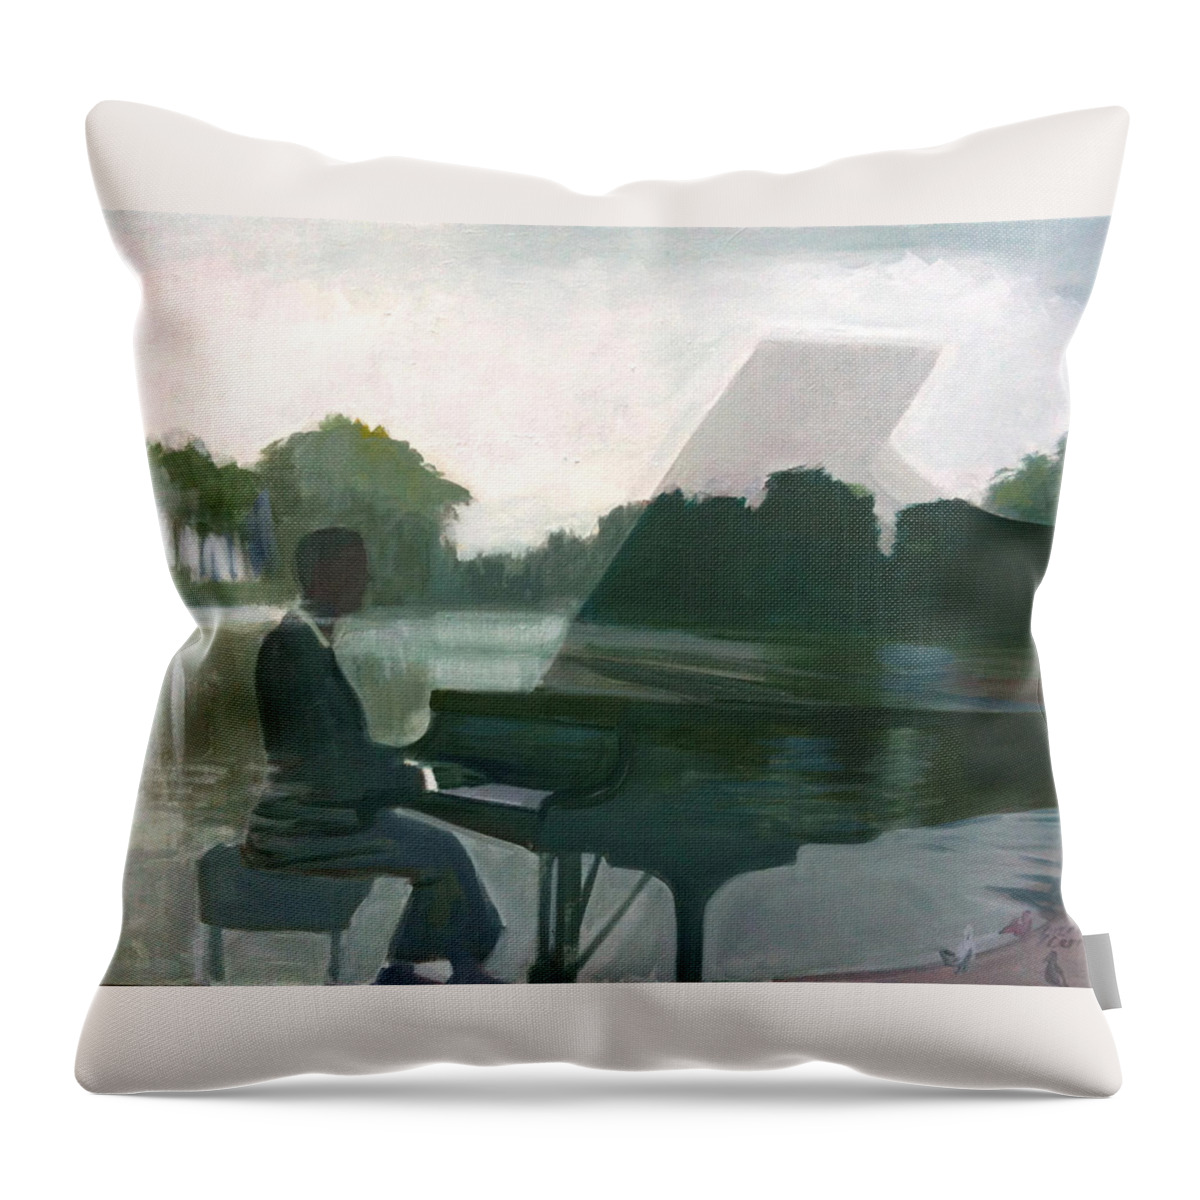 Pianist Throw Pillow featuring the painting Justin Levitt Steinway Piano Spreckles Lake #1 by Suzanne Giuriati Cerny